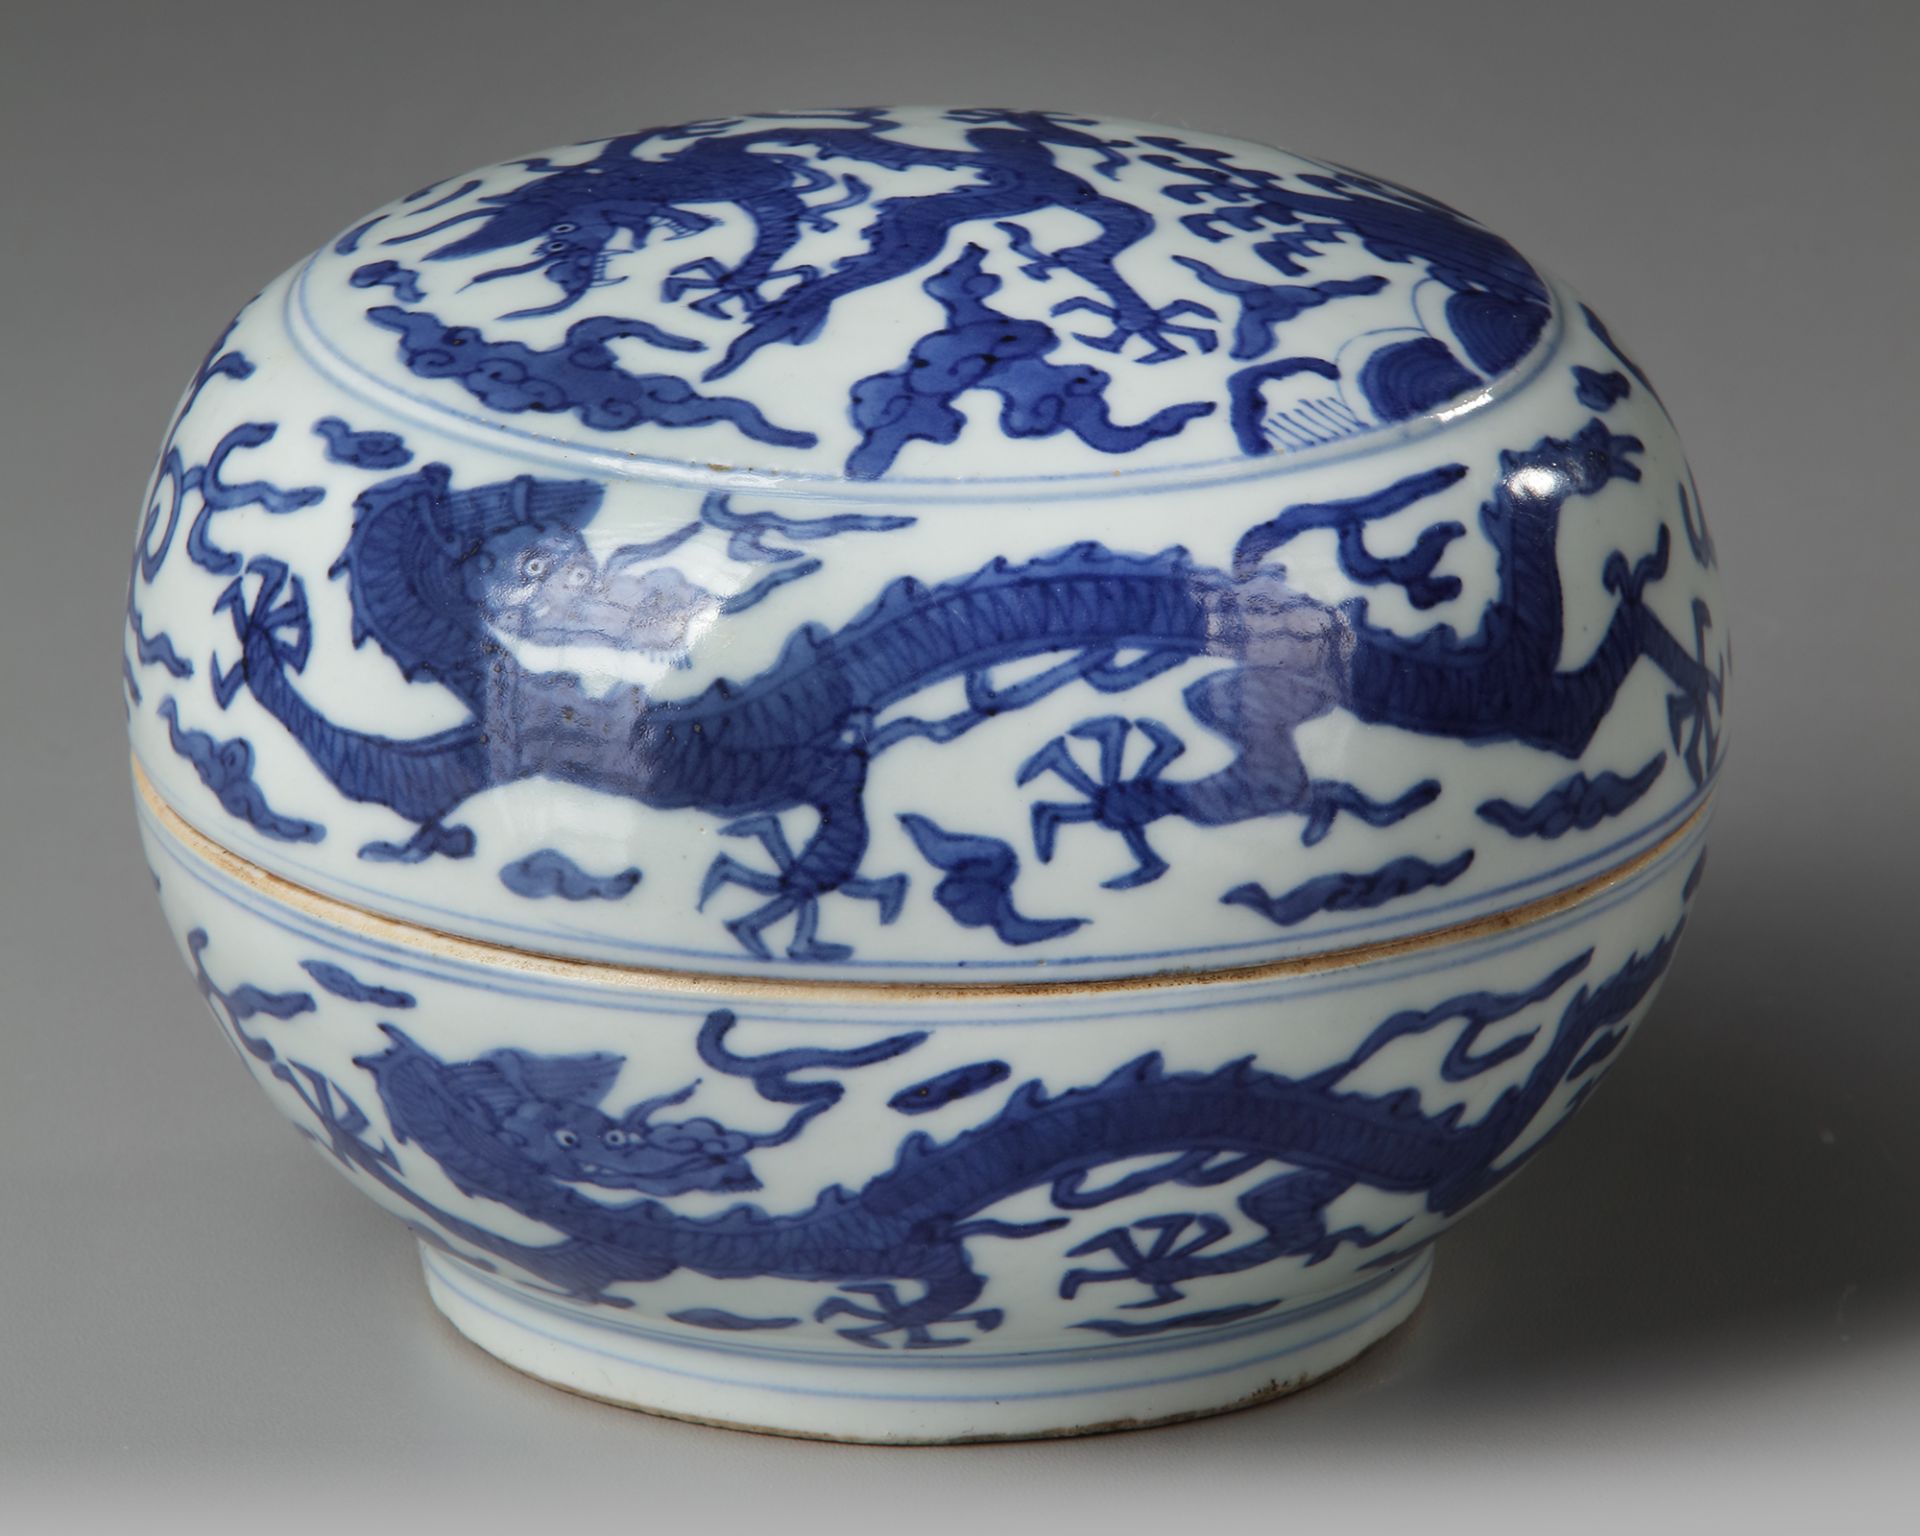 A CHINESE BLUE AND WHITE BOX AND COVER, QING DYNASTY (1644–1911)